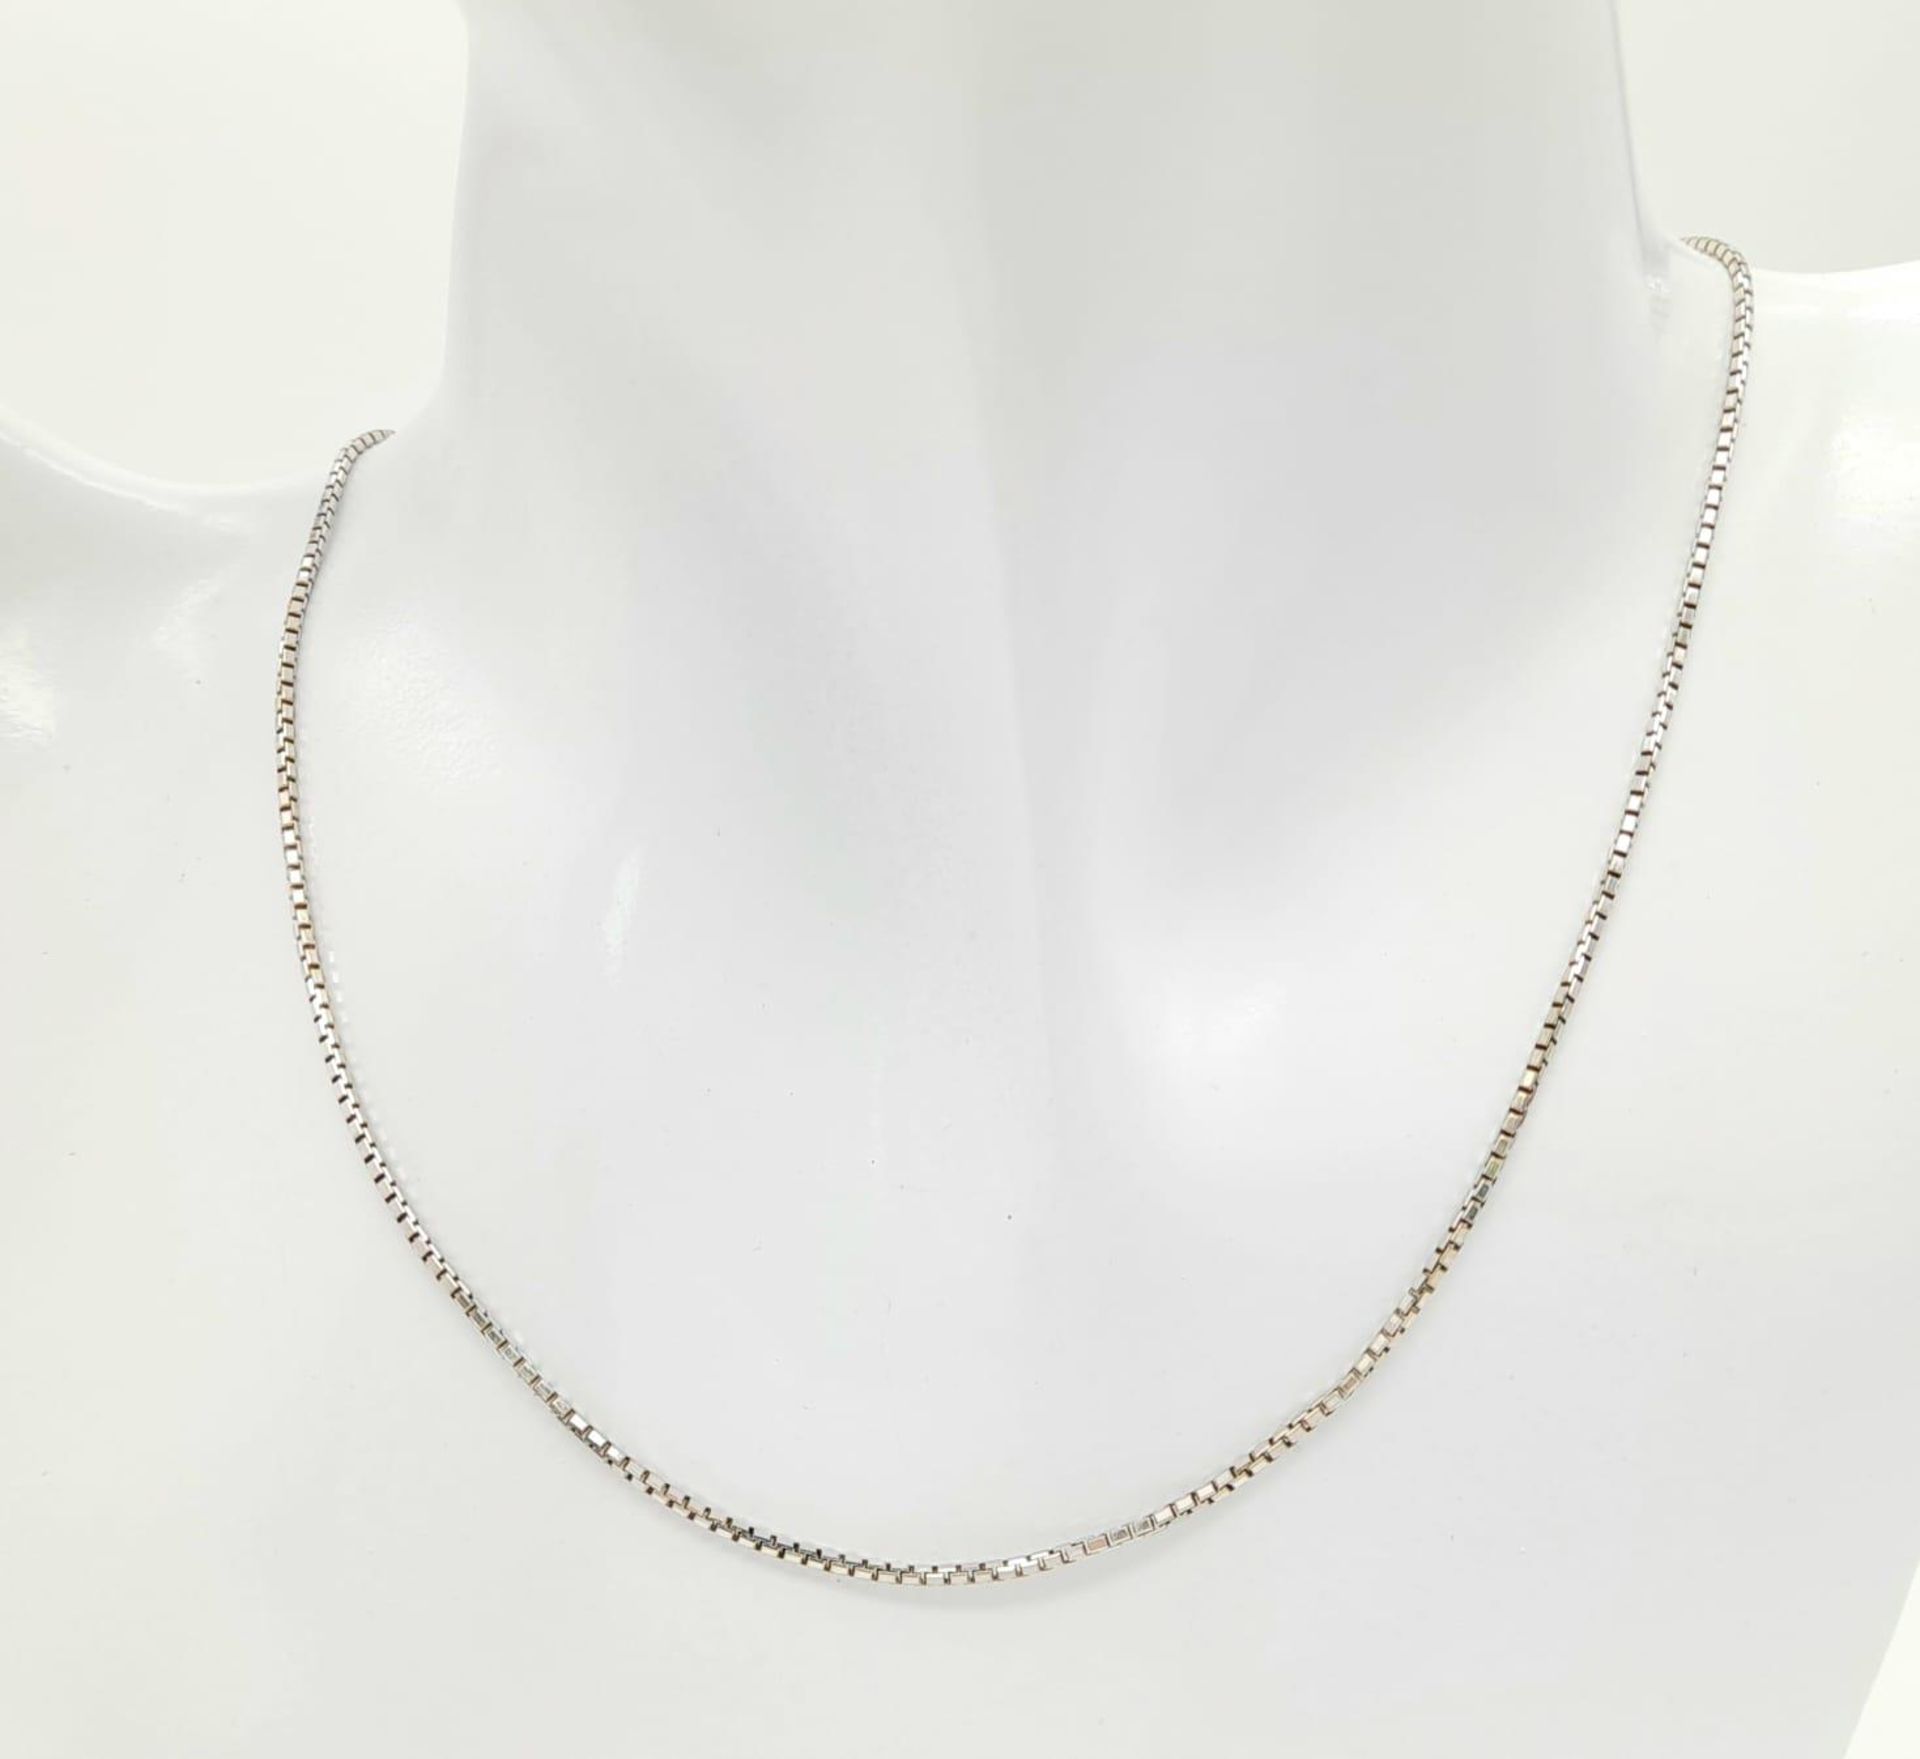 An 18K White Gold Link Necklace. Small rectangular links. 40cm. 4.56g weight. - Image 3 of 9